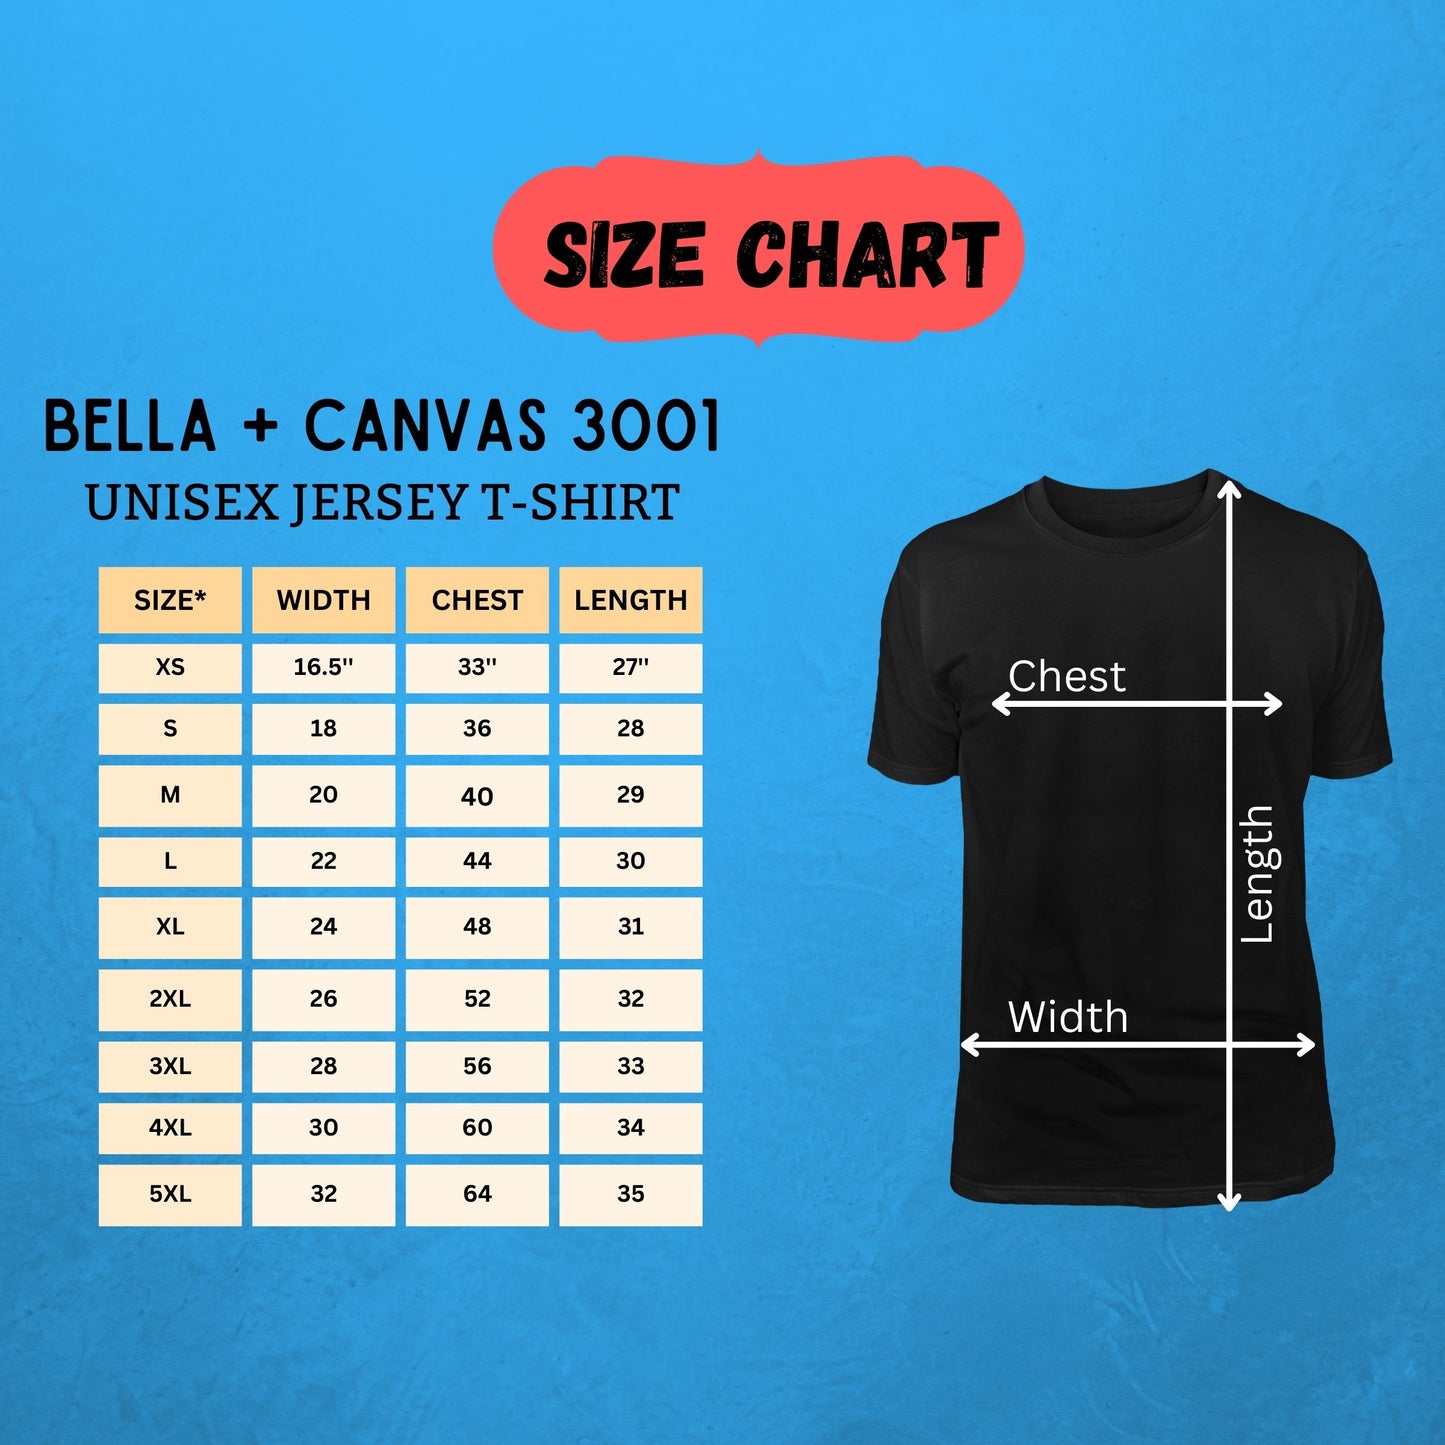 size chart for Bella + Canvas 3001 T-Shirt